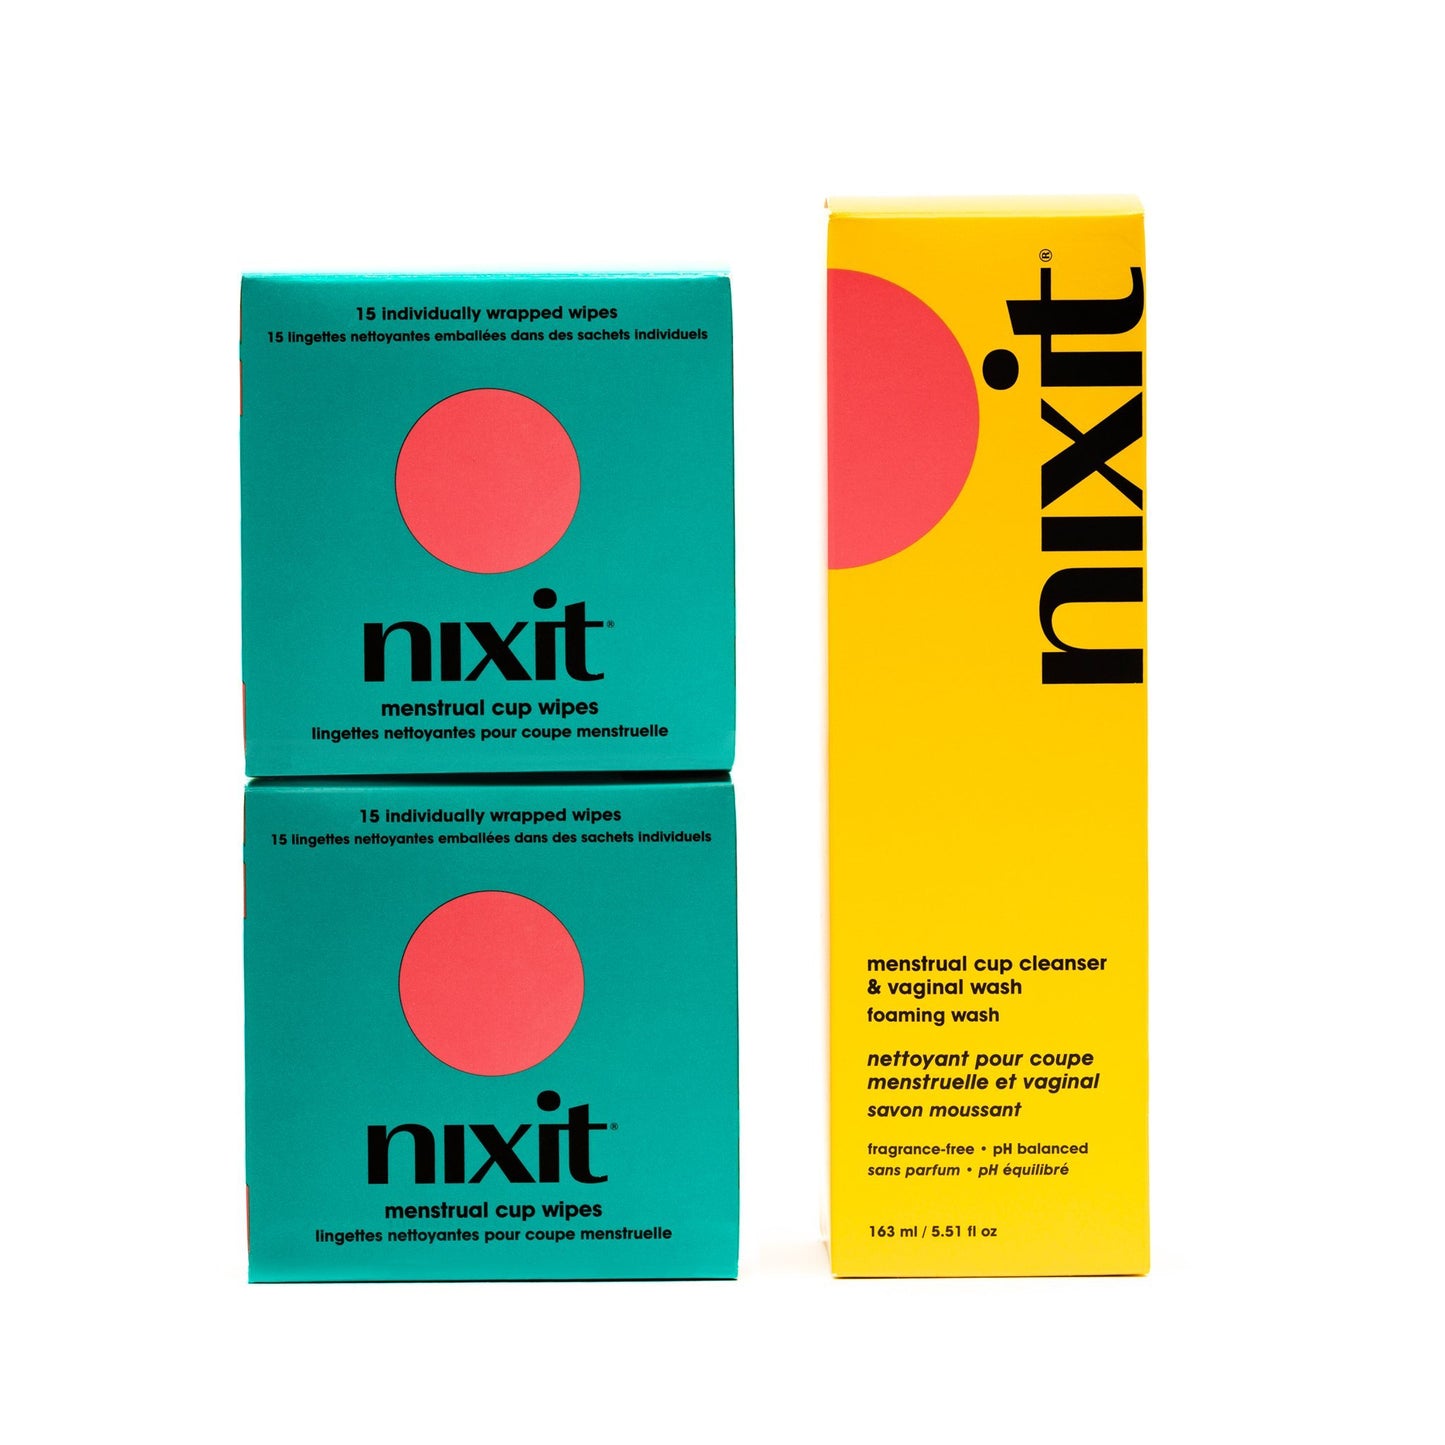 Photo of nixit wash our foaming wash that's perfect for your cup and your vulva, and 2 nixit wipes boxes (15 per pack)  convenient menstrual cup wipes for keeping it clean on-the-go